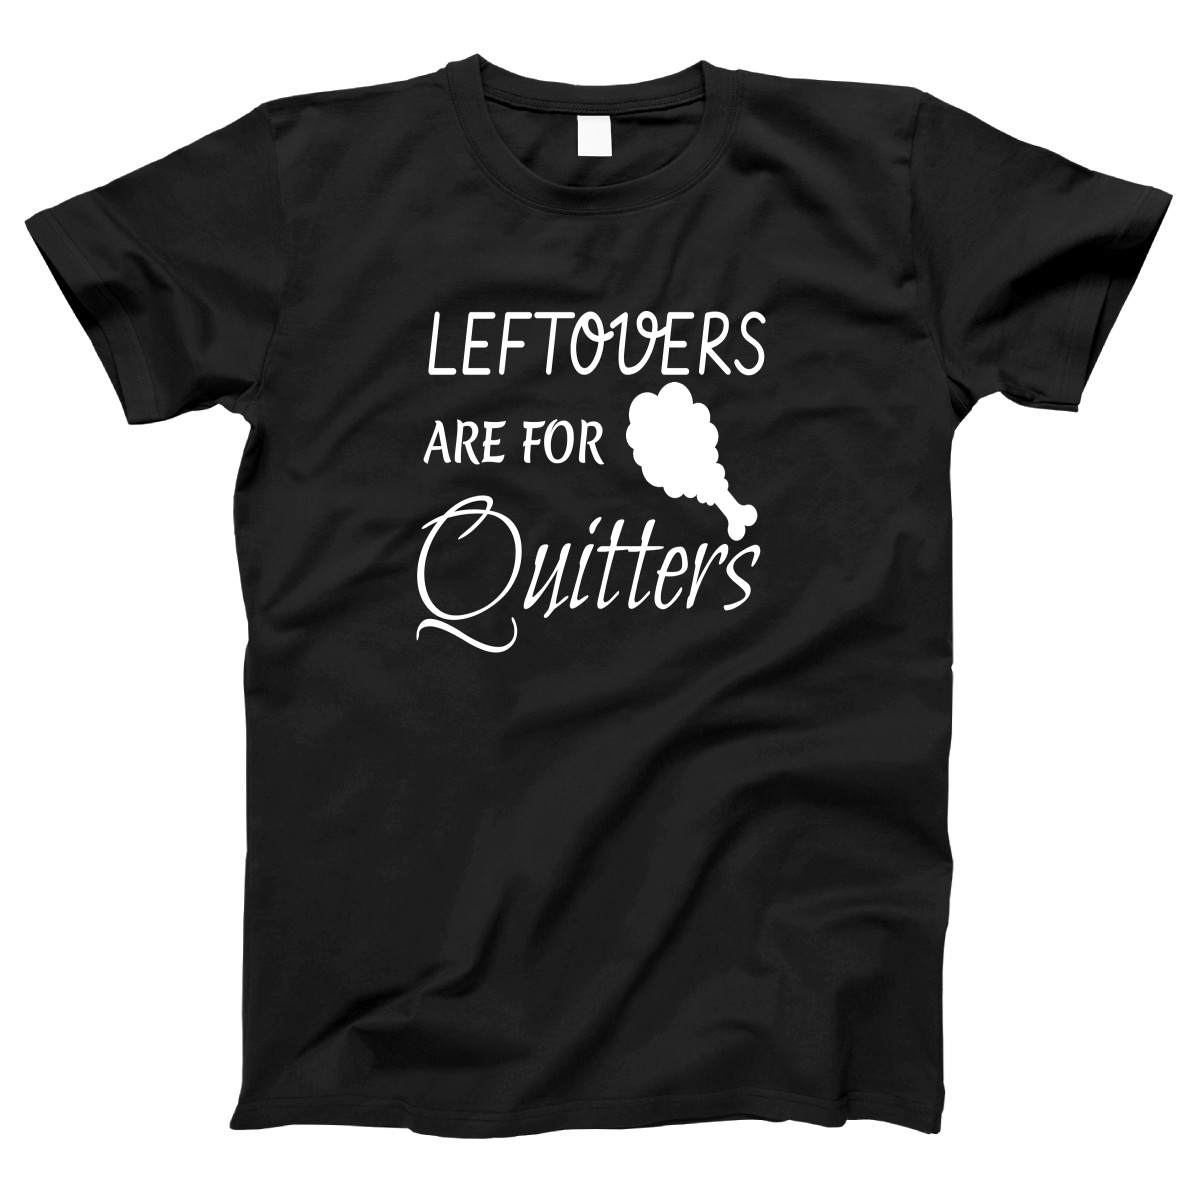 Leftovers Are For Quitters Women's T-shirt | Black